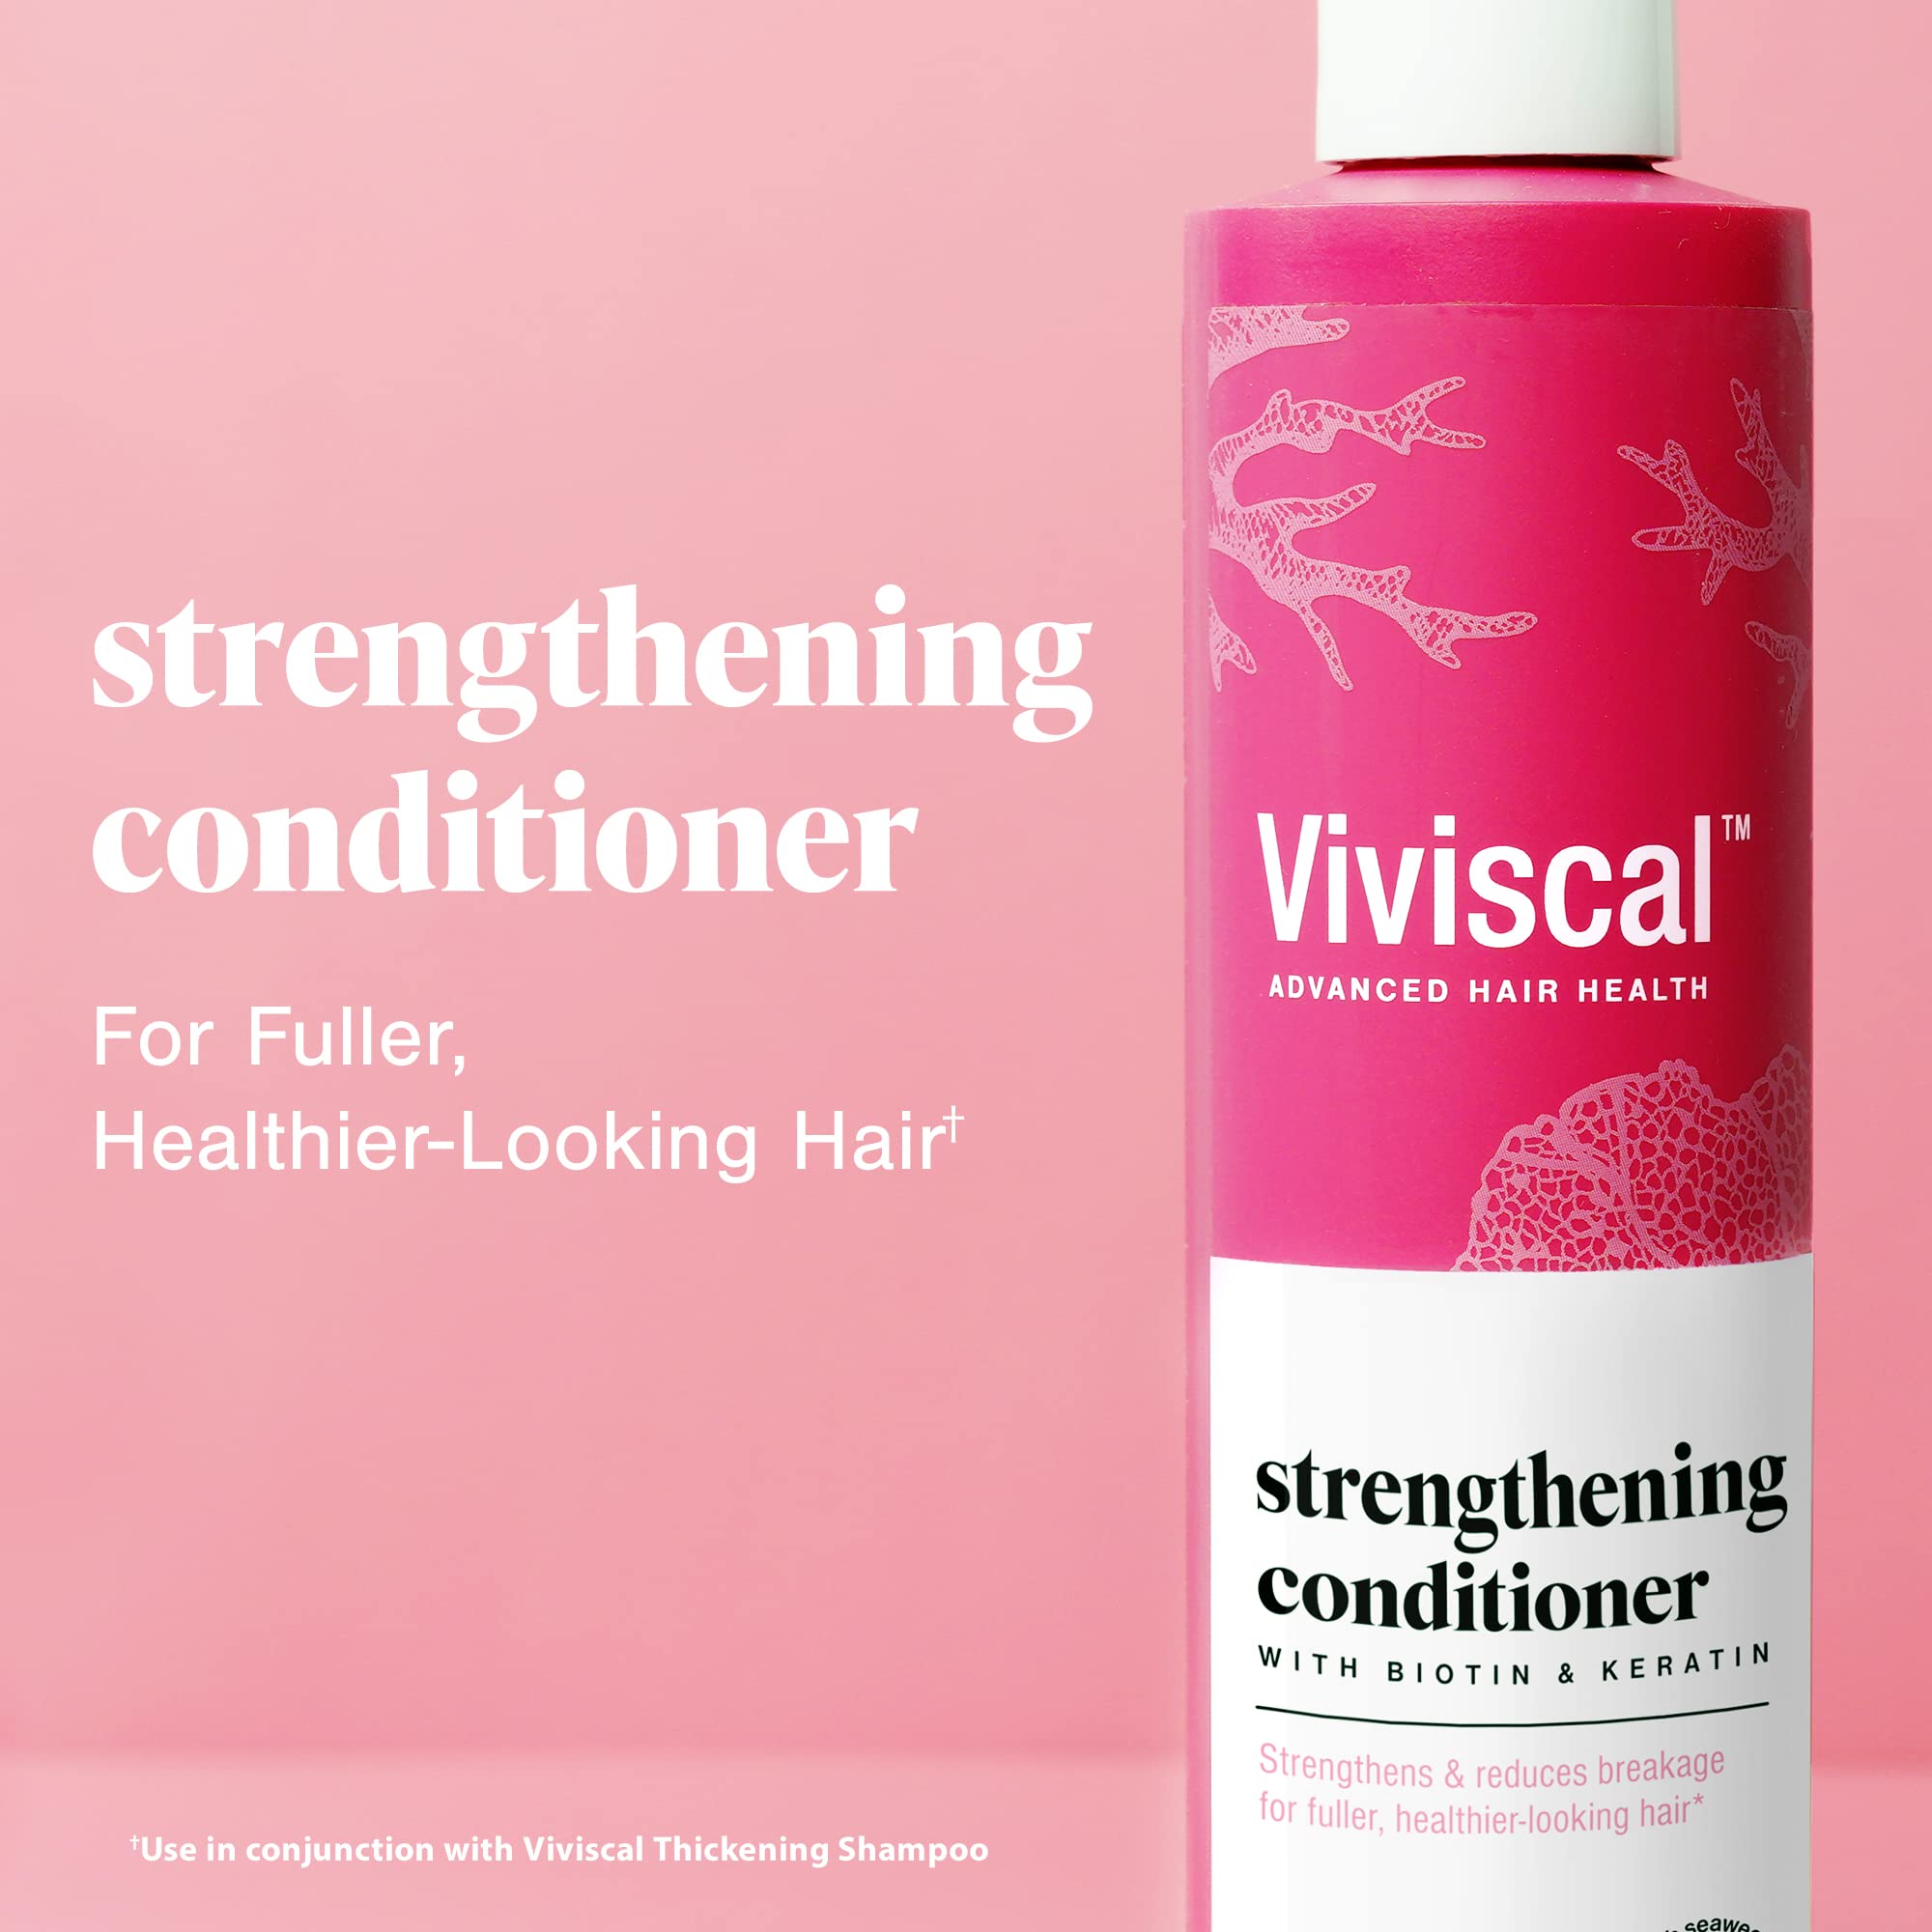 Viviscal Hair Thickening Conditioner, Moisturizing Formula Conditions & Strengthens, Biotin & Keratin, Marine Collagen & Seaweed Extract, Hydrating, Healthier Looking Hair, 250ml (8.45 Fl. Oz.)